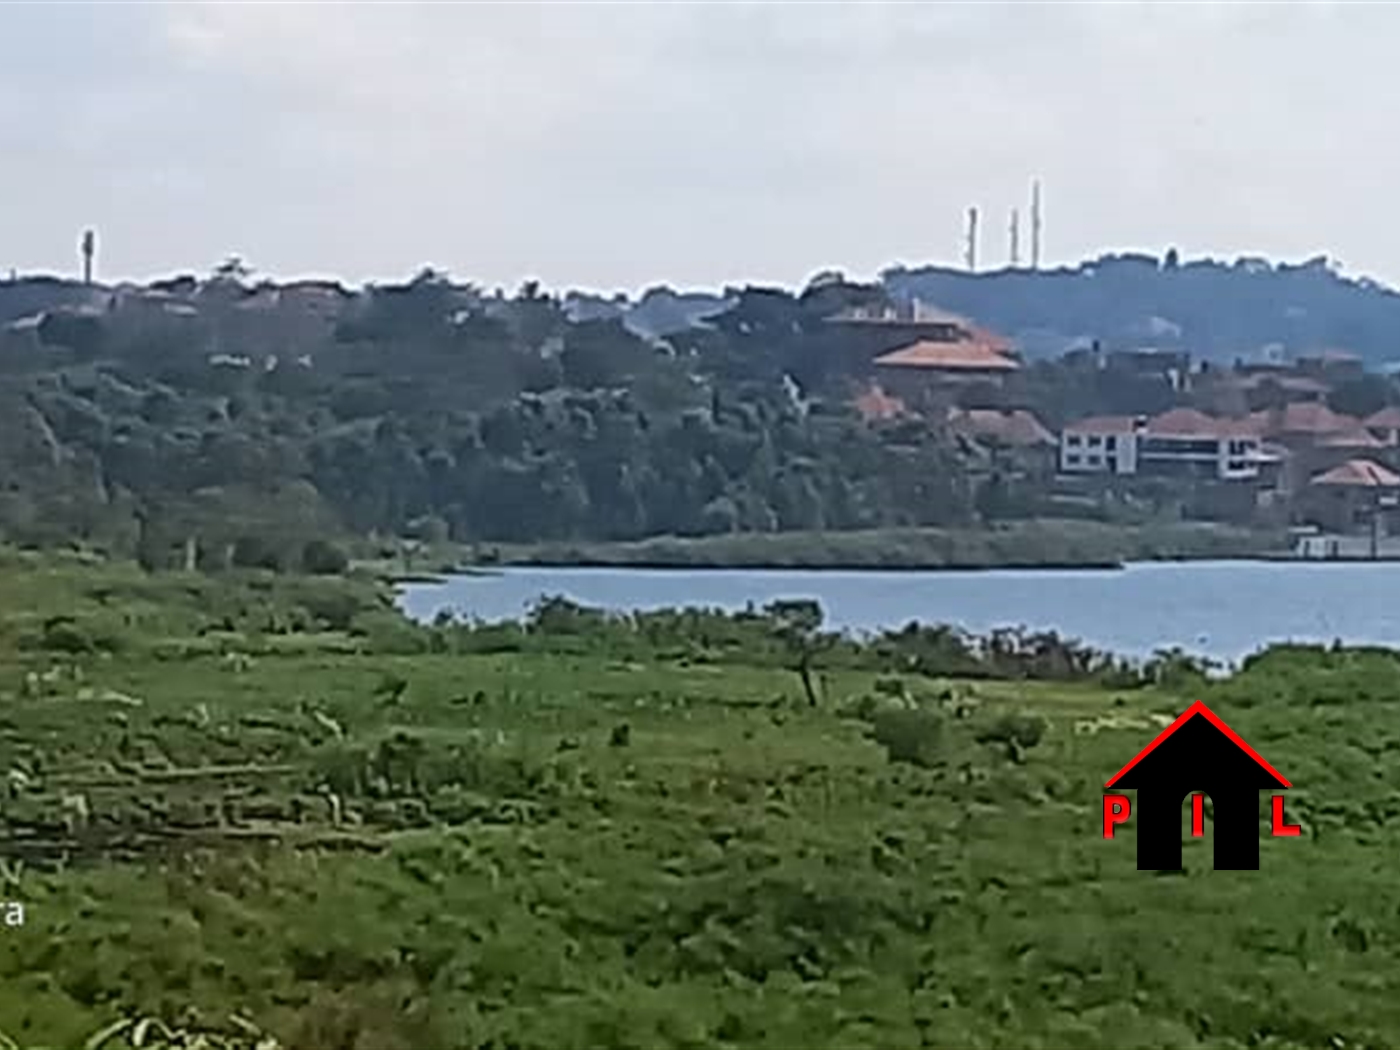 Commercial Land for sale in Busaabala Wakiso